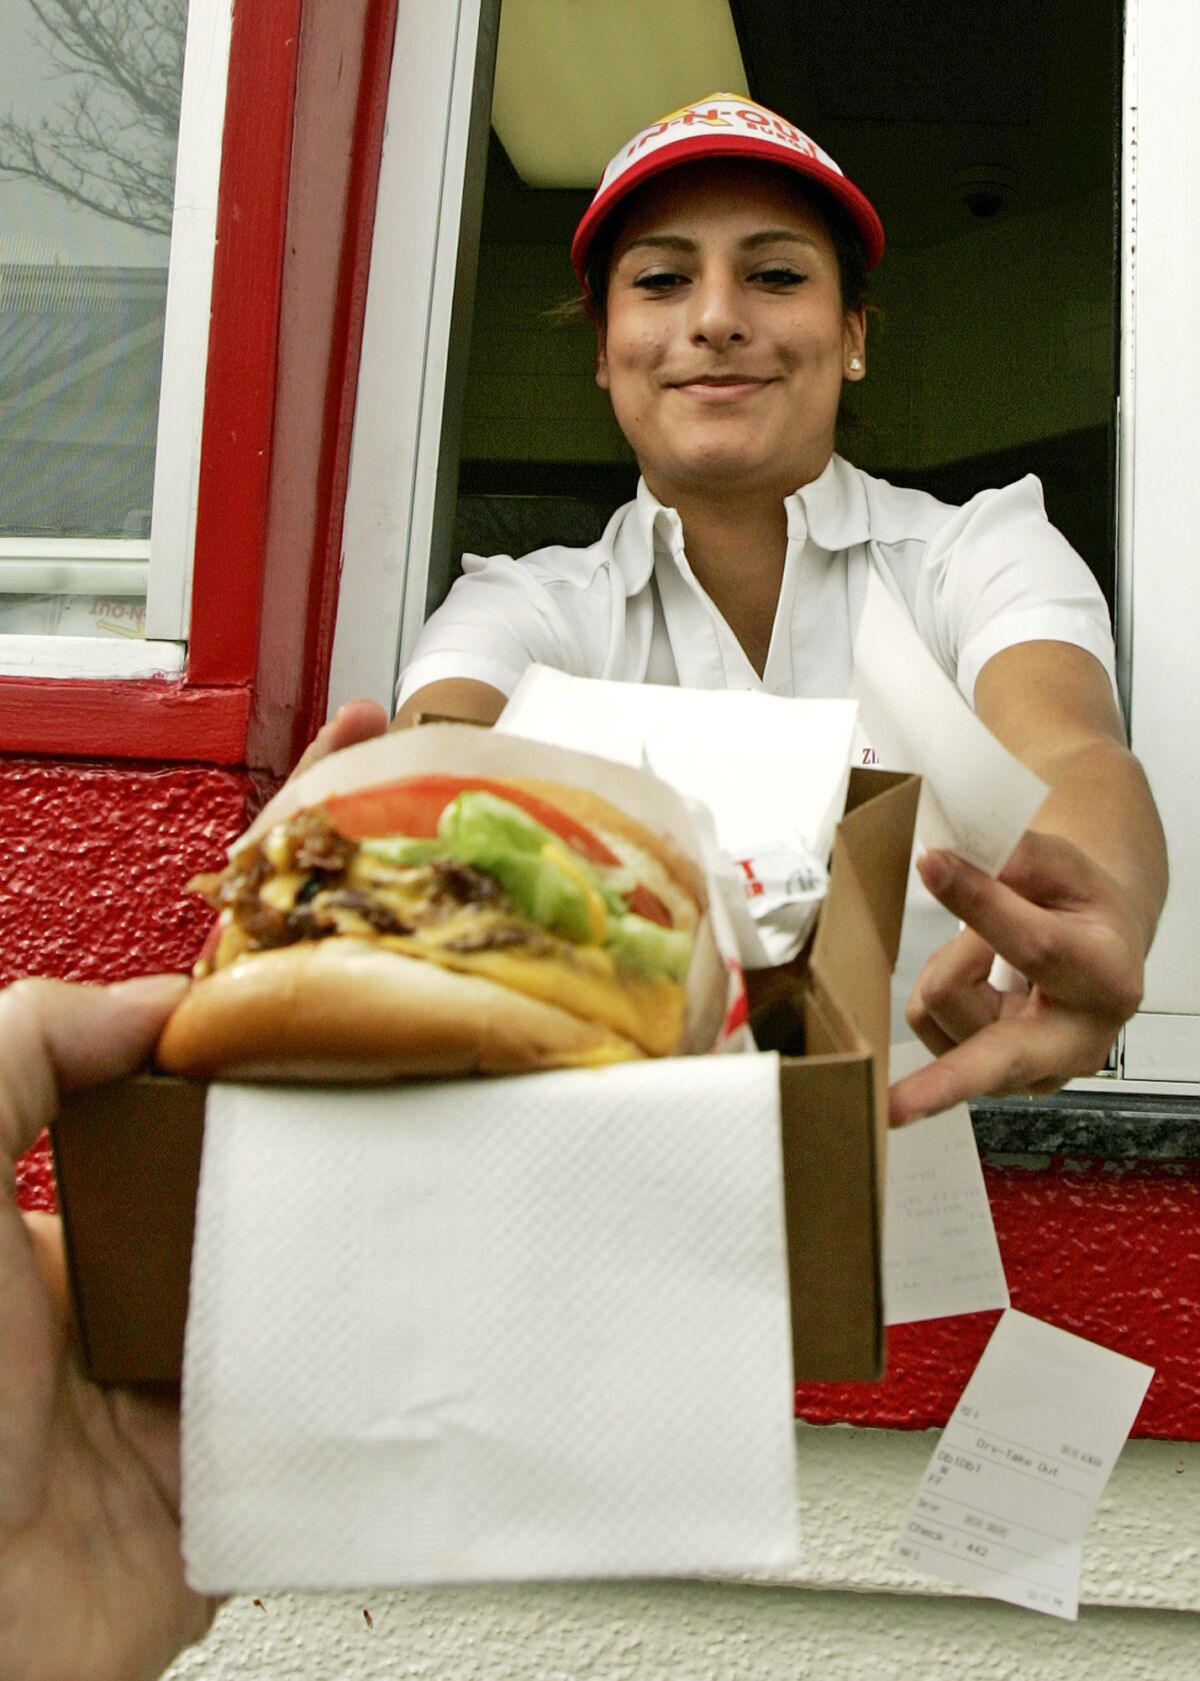 While not a San Diego-specific burger, locals can't get enough of the Double Double from In-N-Out.